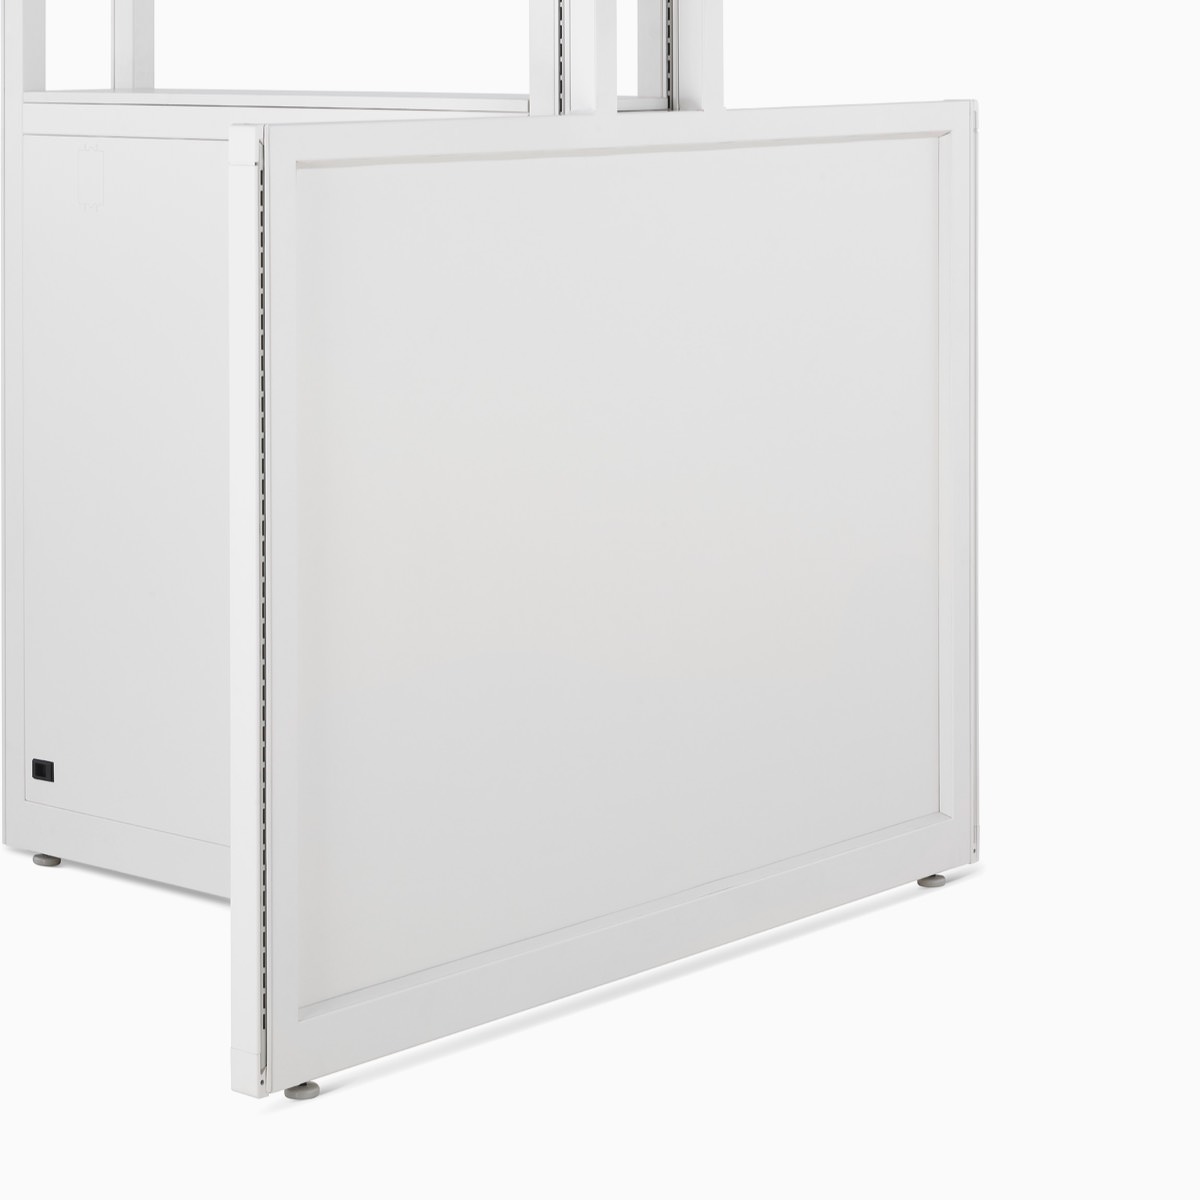 Detail of Co/Struc System frame and panel in soft white.